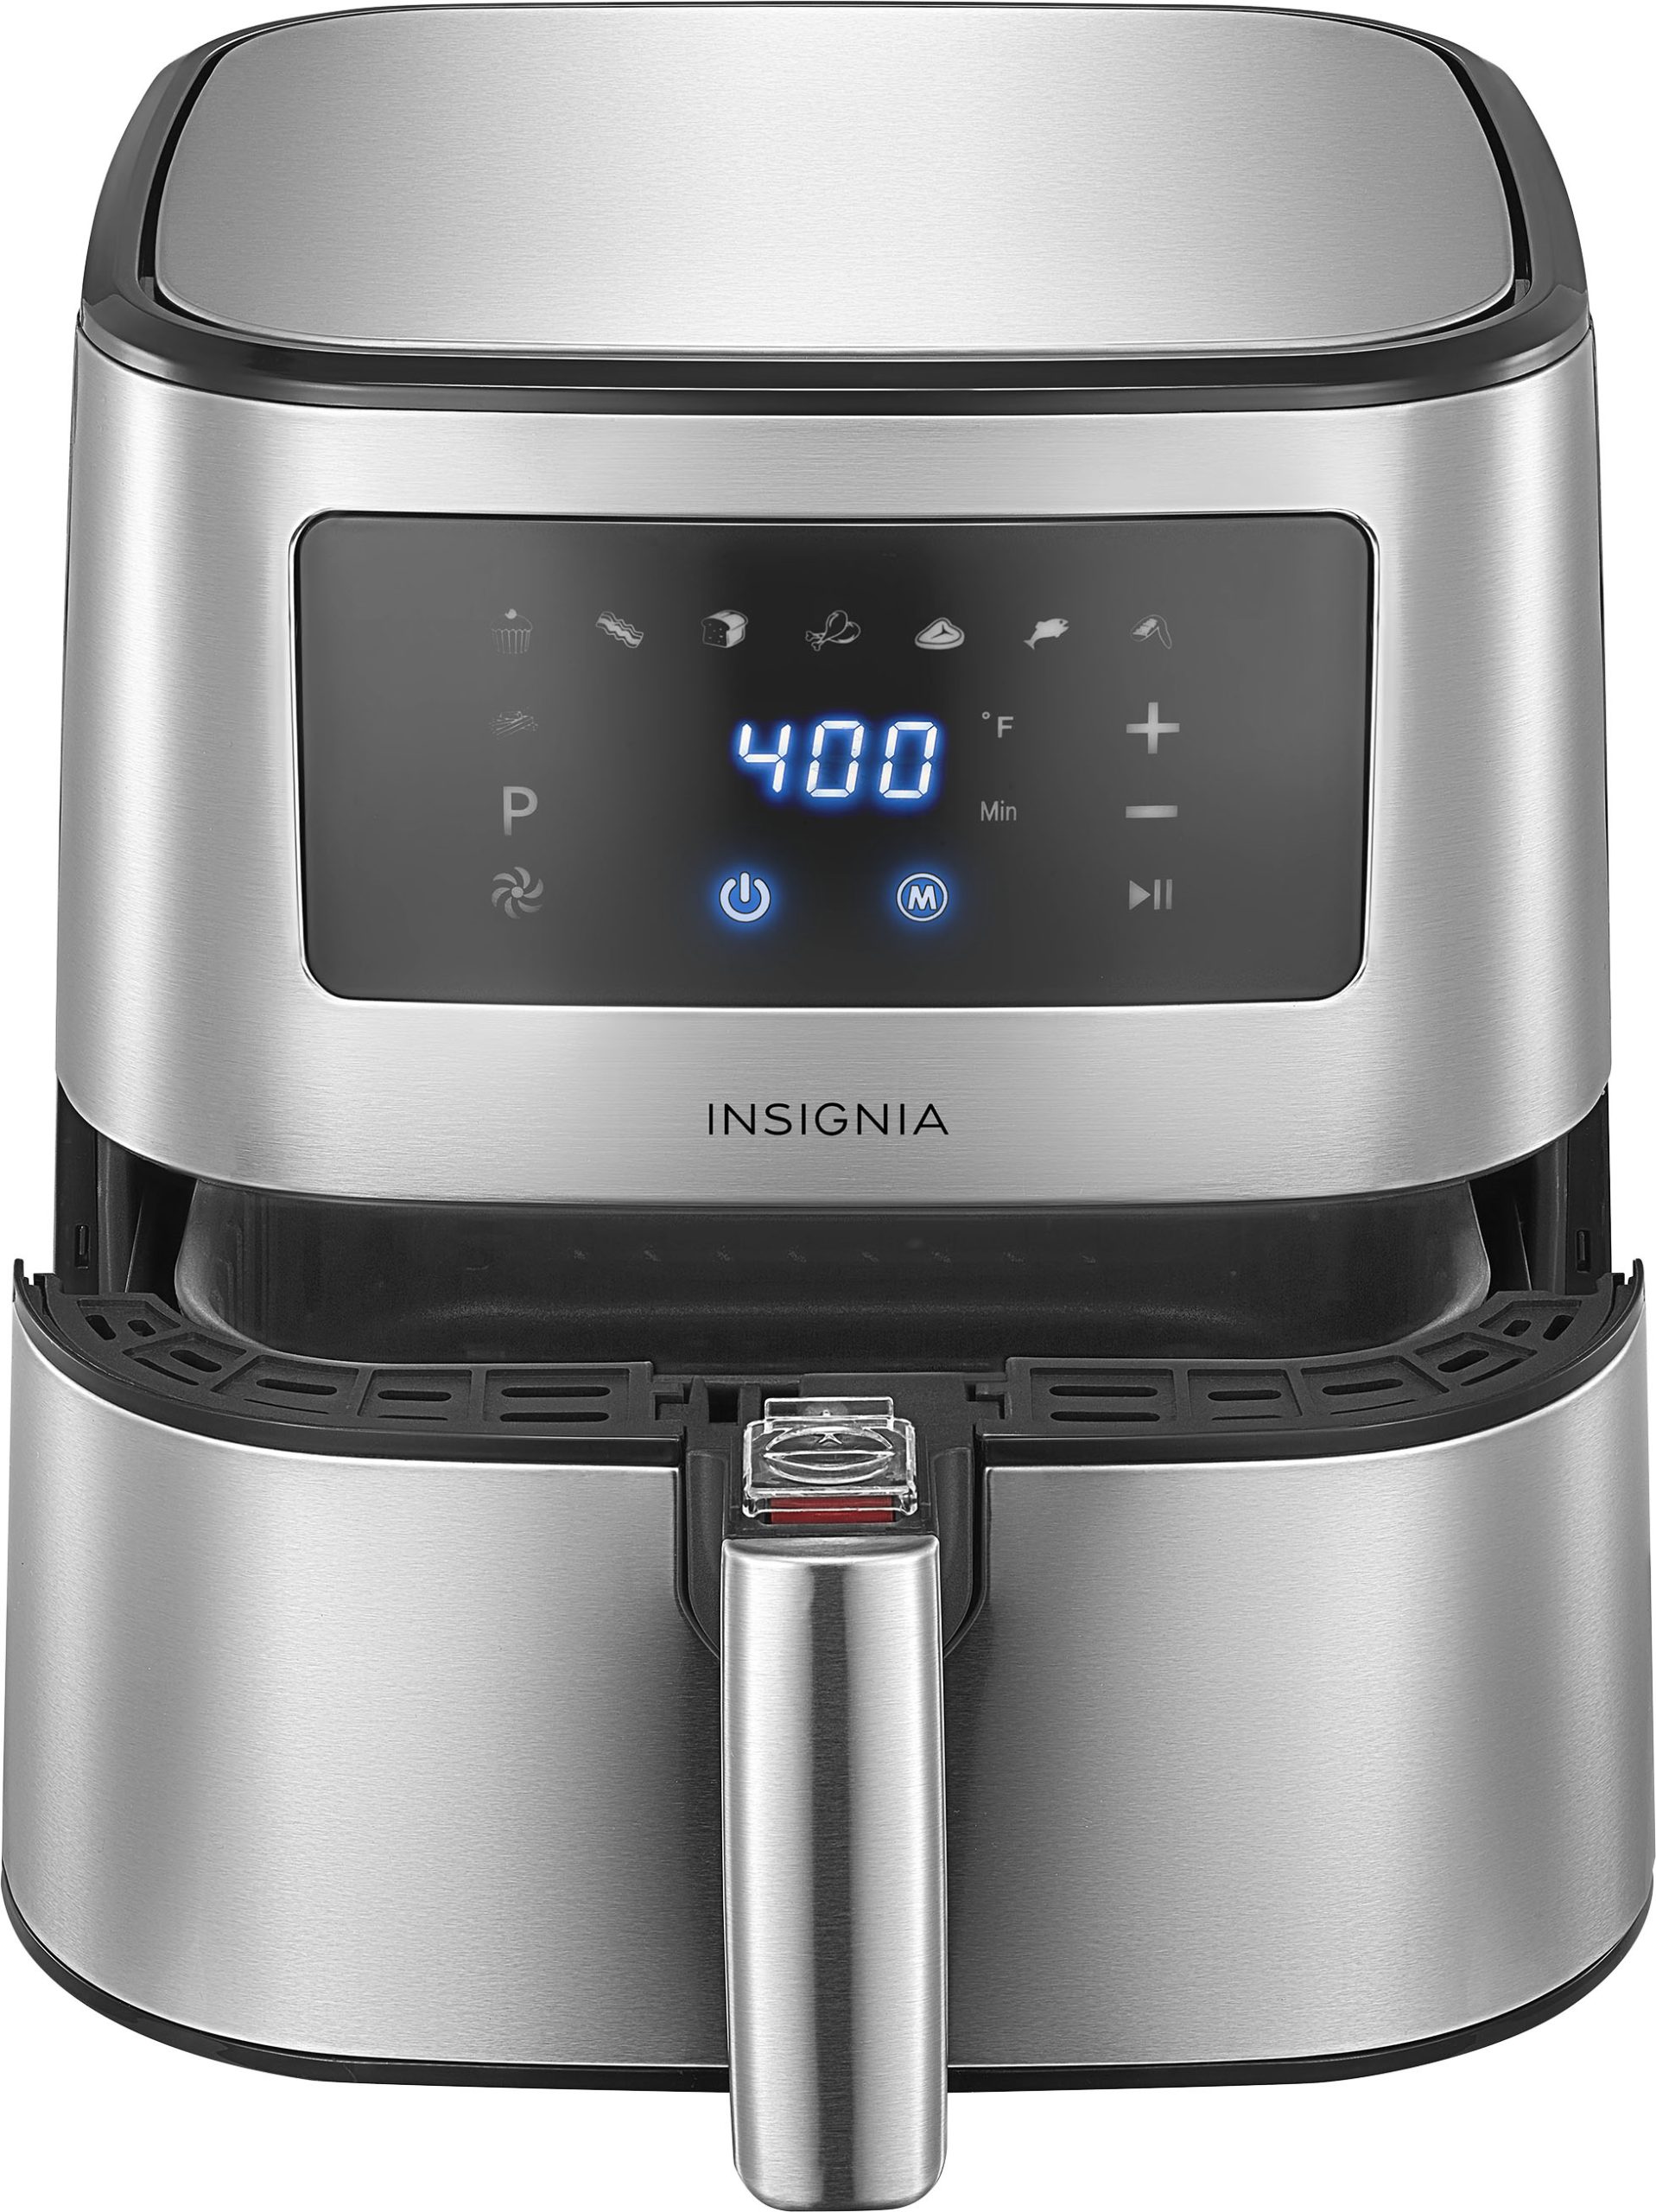 Insignia™ – 5 Qt. Digital Air Fryer – Stainless Steel – Just $69.99 at Best Buy